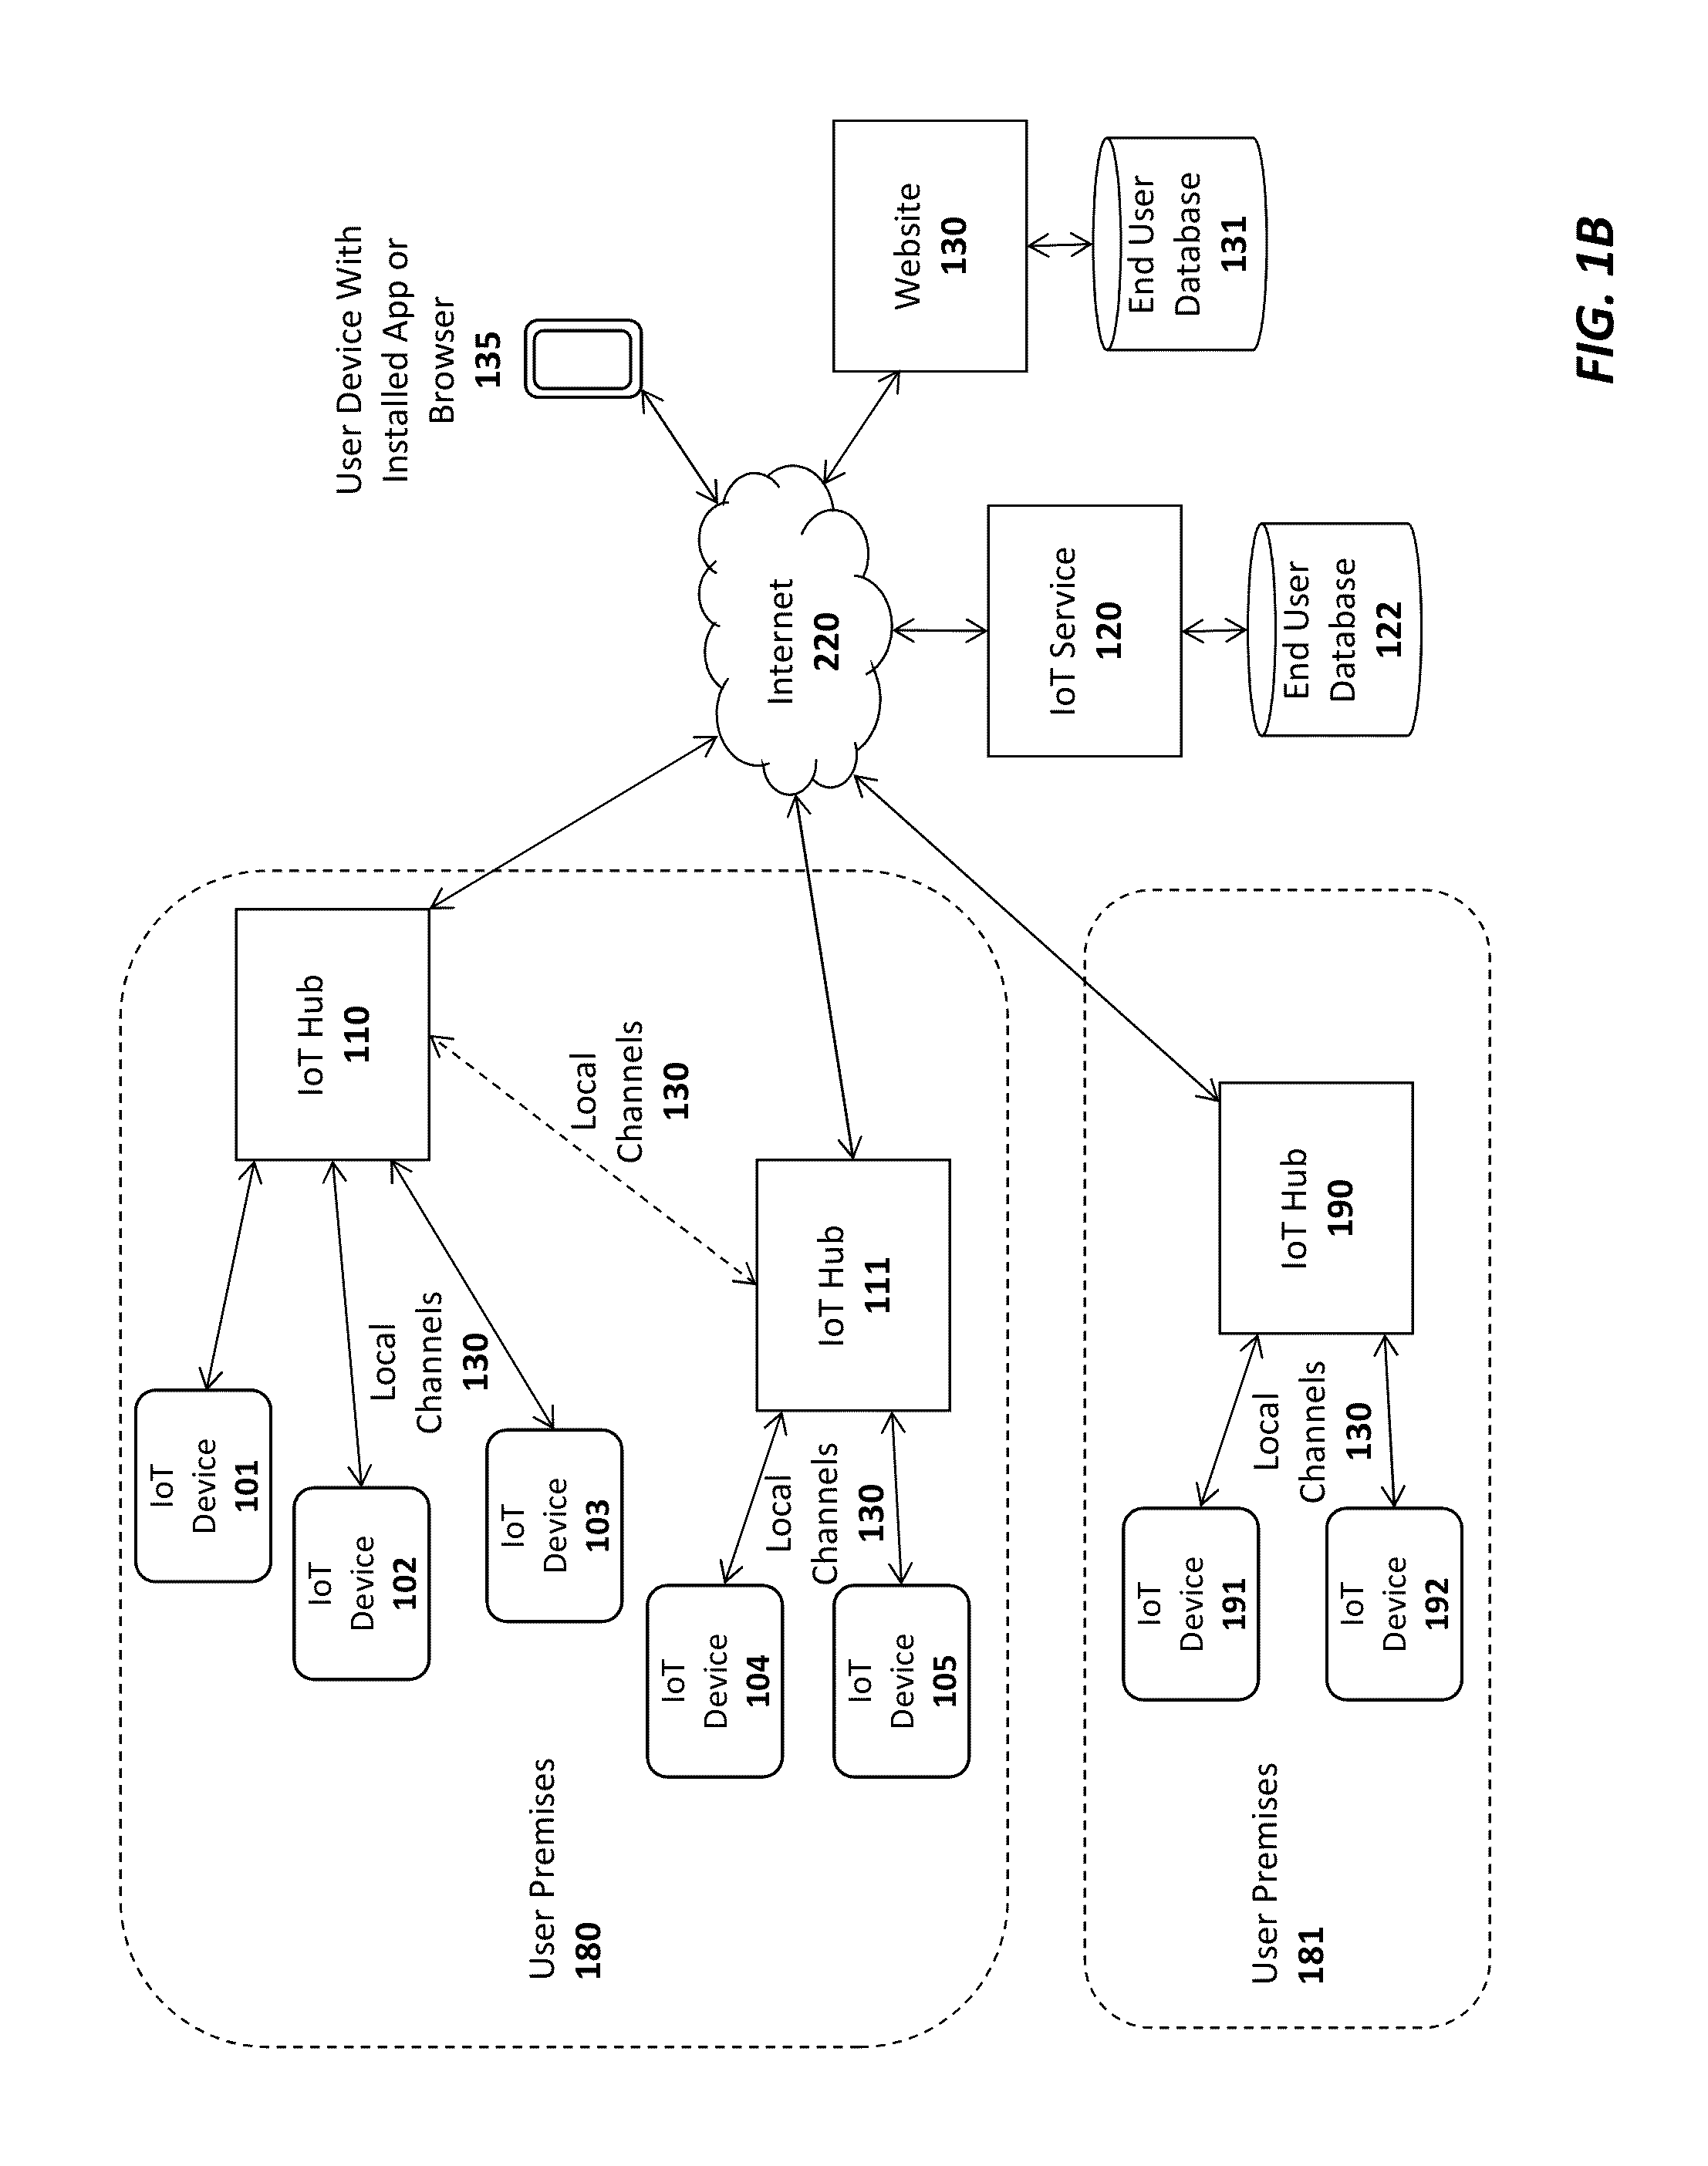 System and method for securely connecting network devices